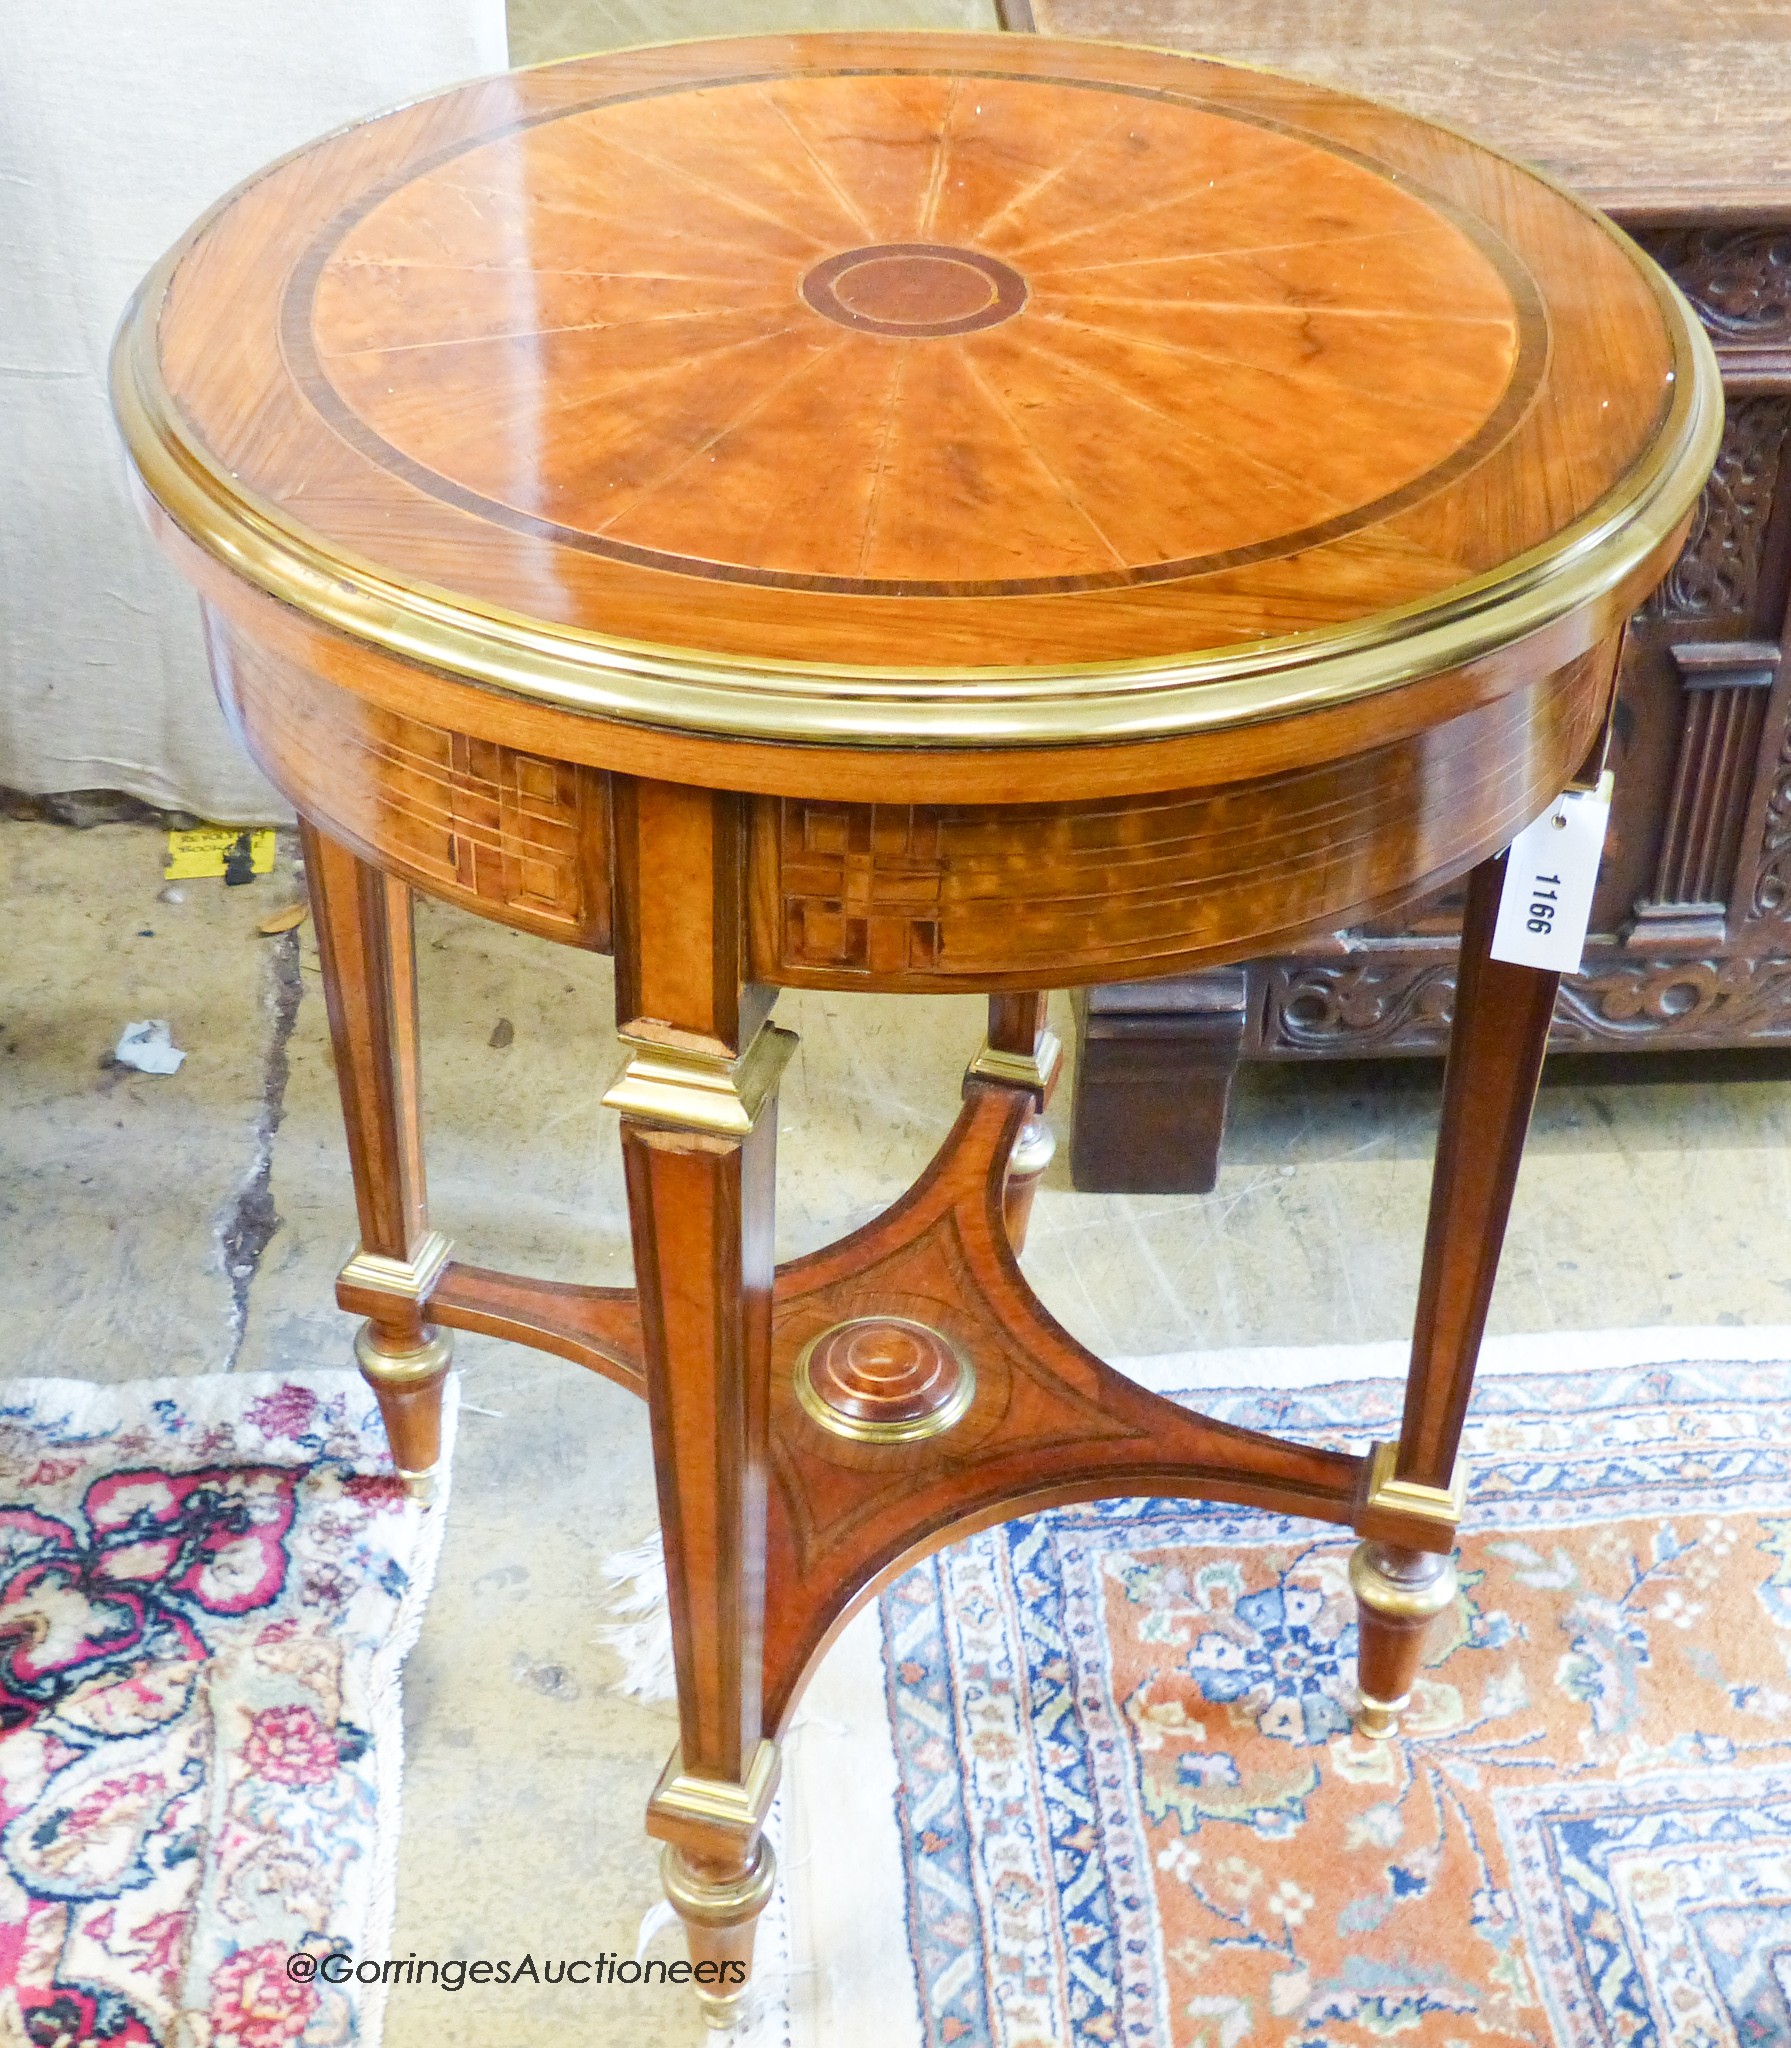 A French transitional style circular centre table, 62cm diameter, height 76cm